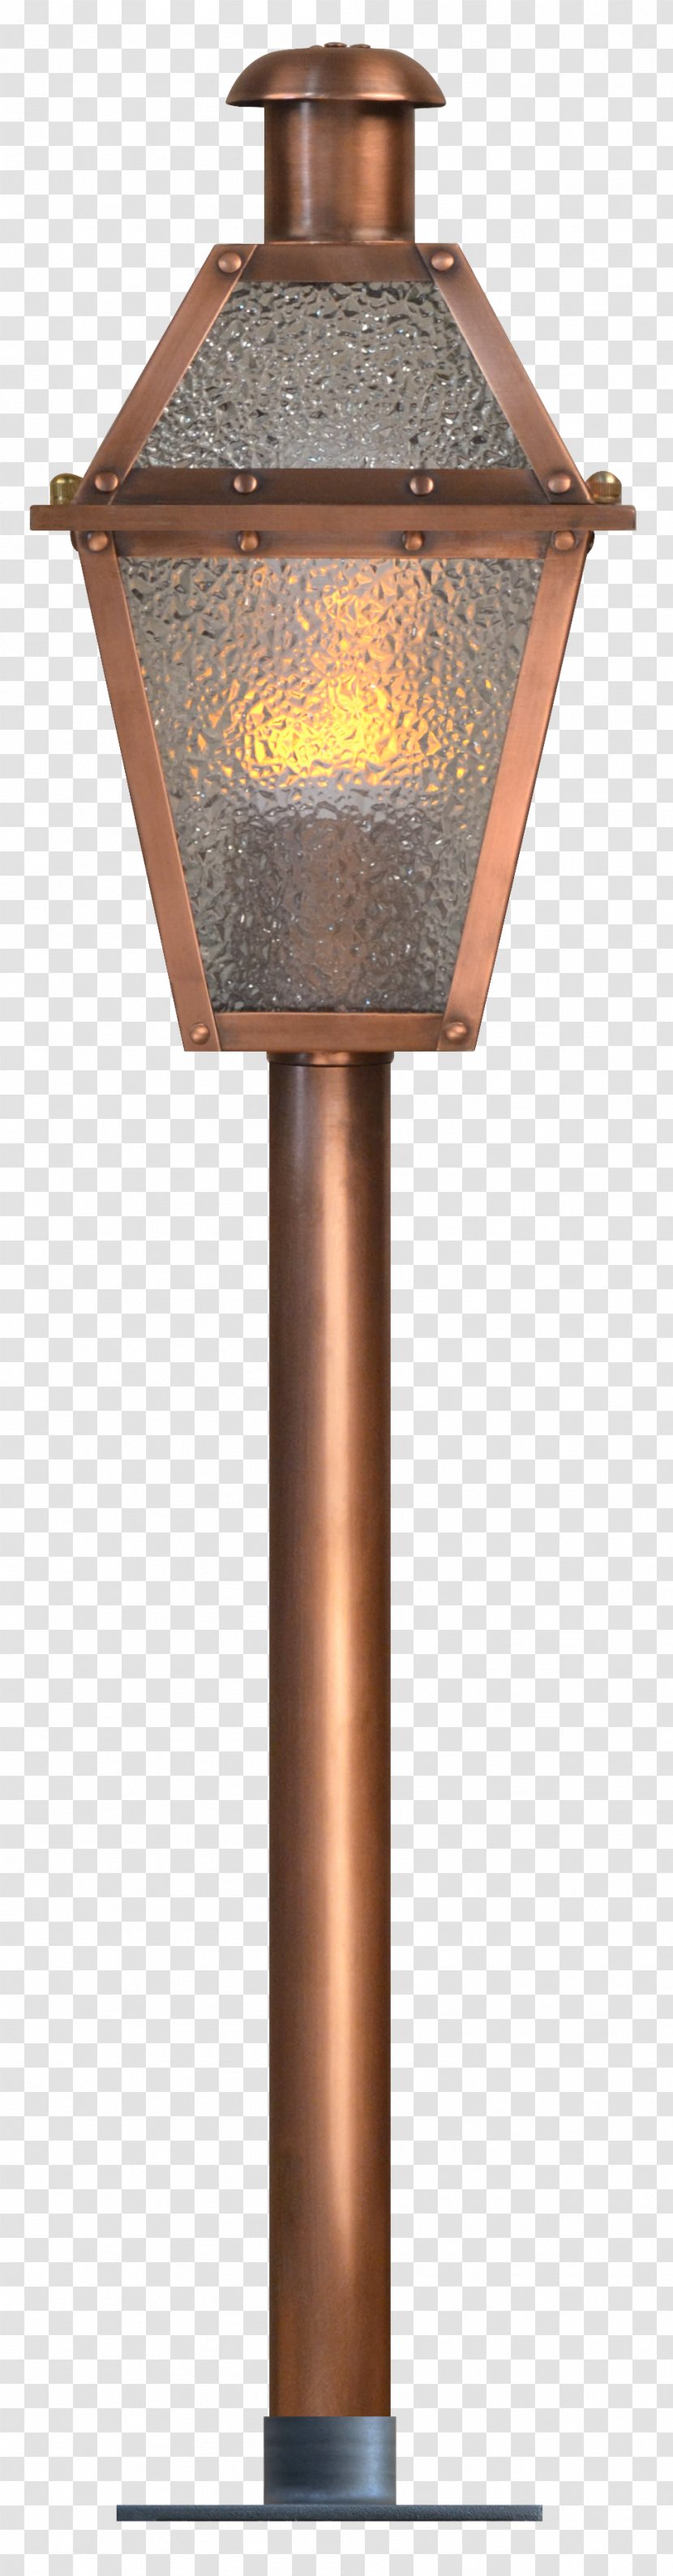 Landscape Lighting Lantern Coppersmith - Electricity - Pathway Transparent PNG